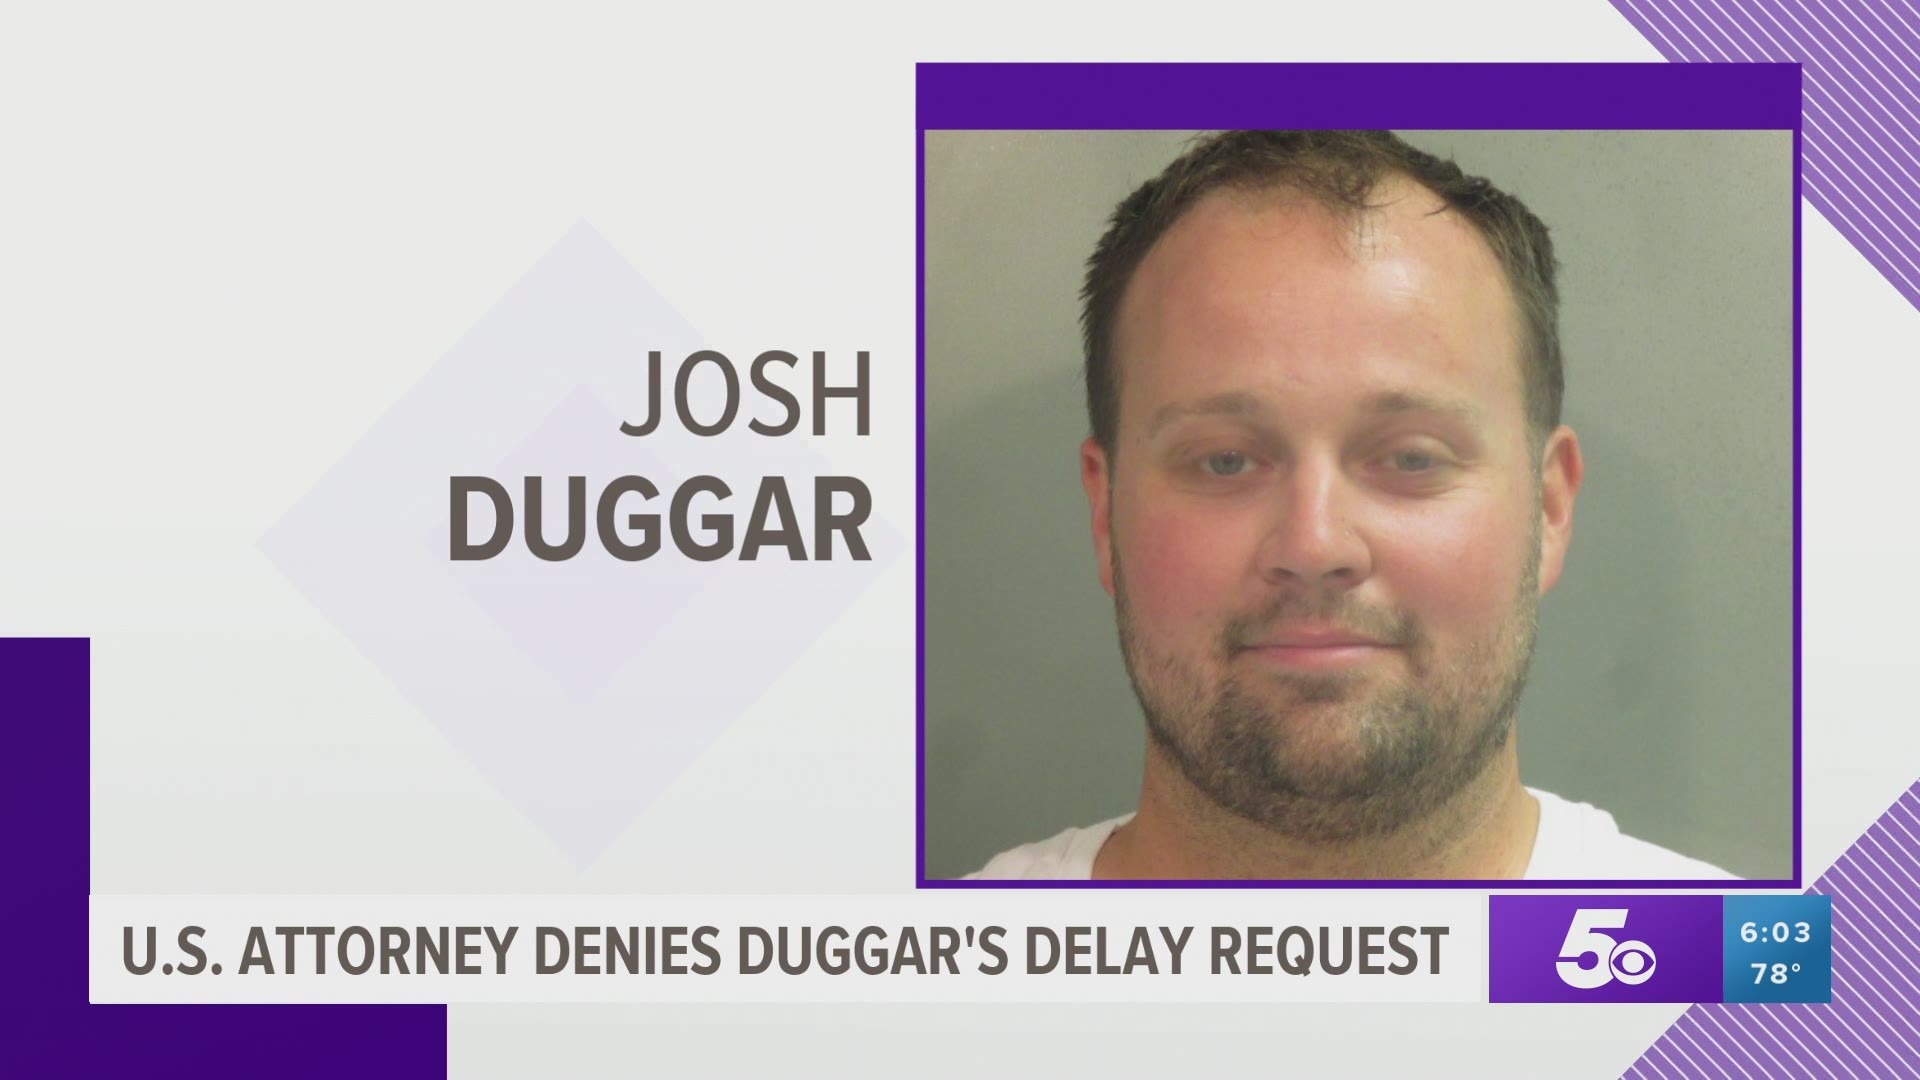 Duggar faces two charges of possessing child porn and faces a maximum of 20 years in prison and fines up to $250,000 for each charge if convicted